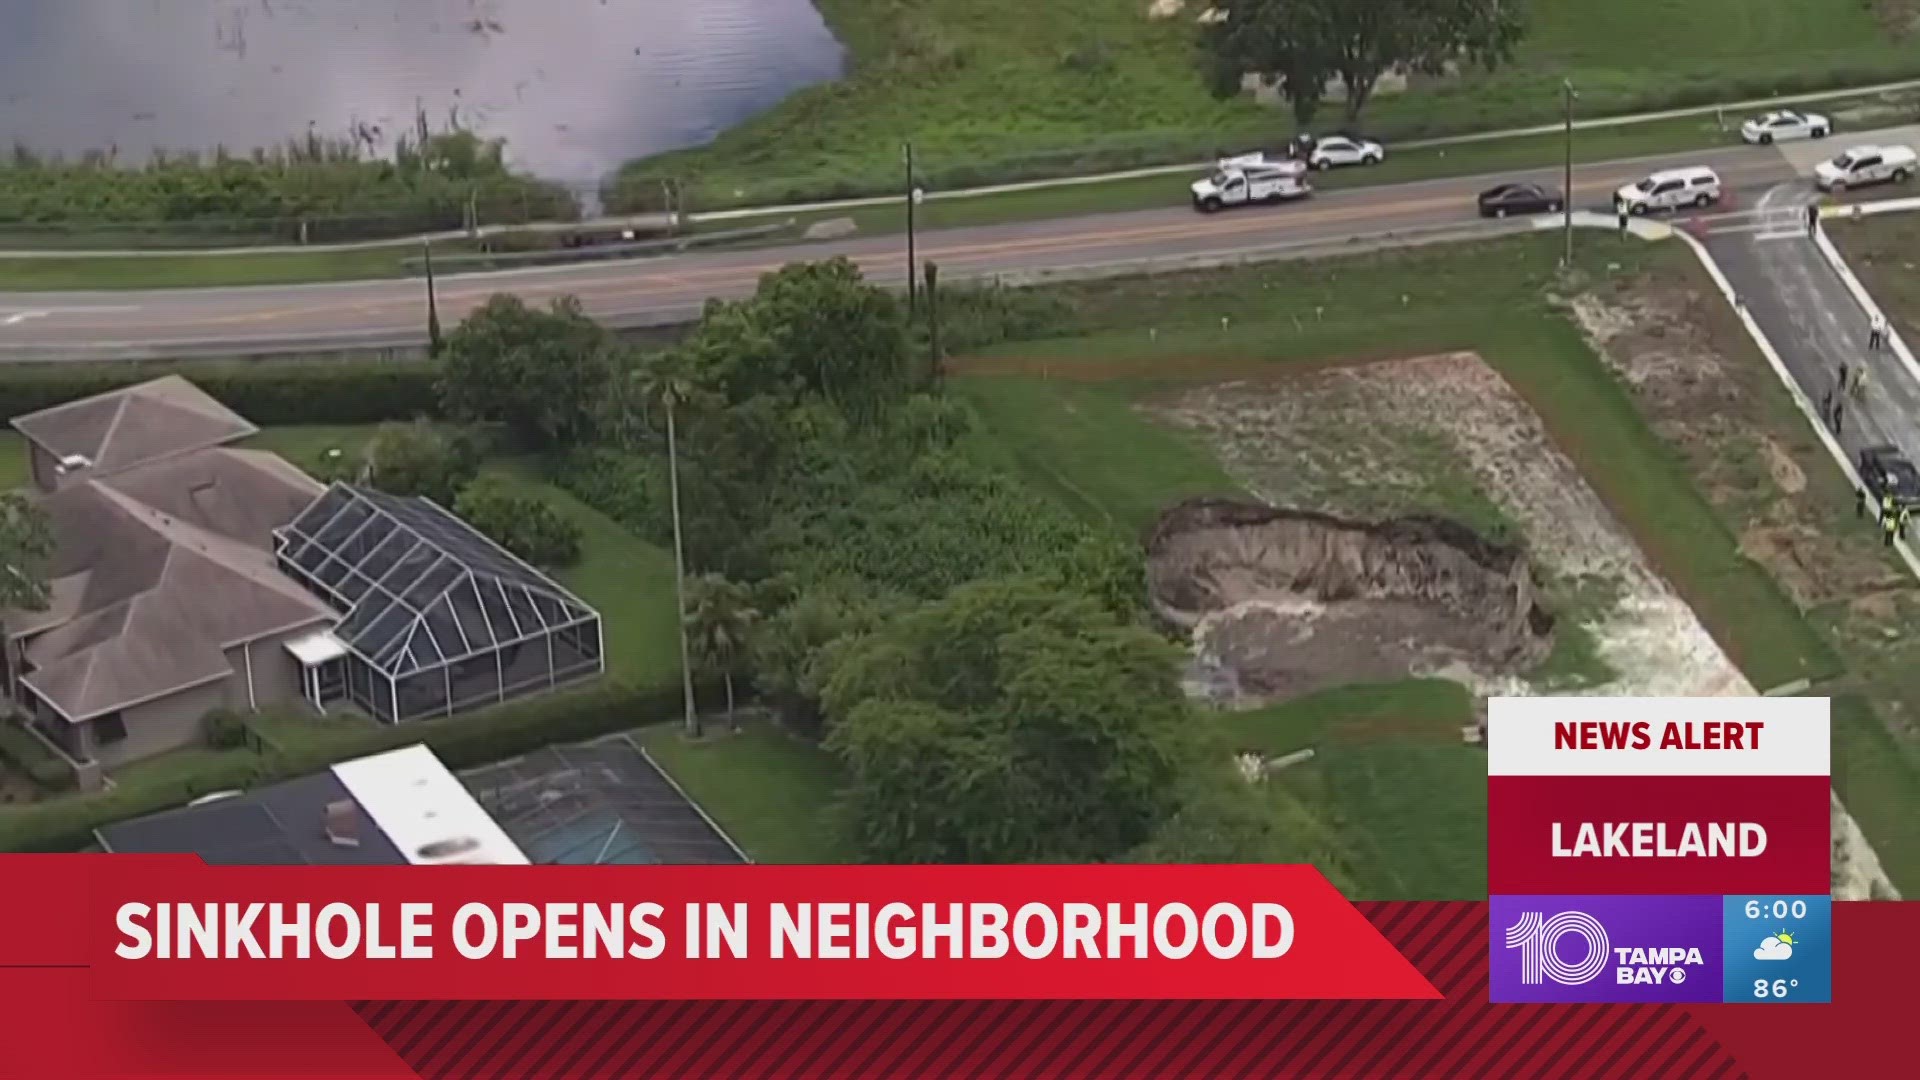 "The sinkhole is growing, we don't know how much bigger it will grow," Sheriff Grady Judd said.